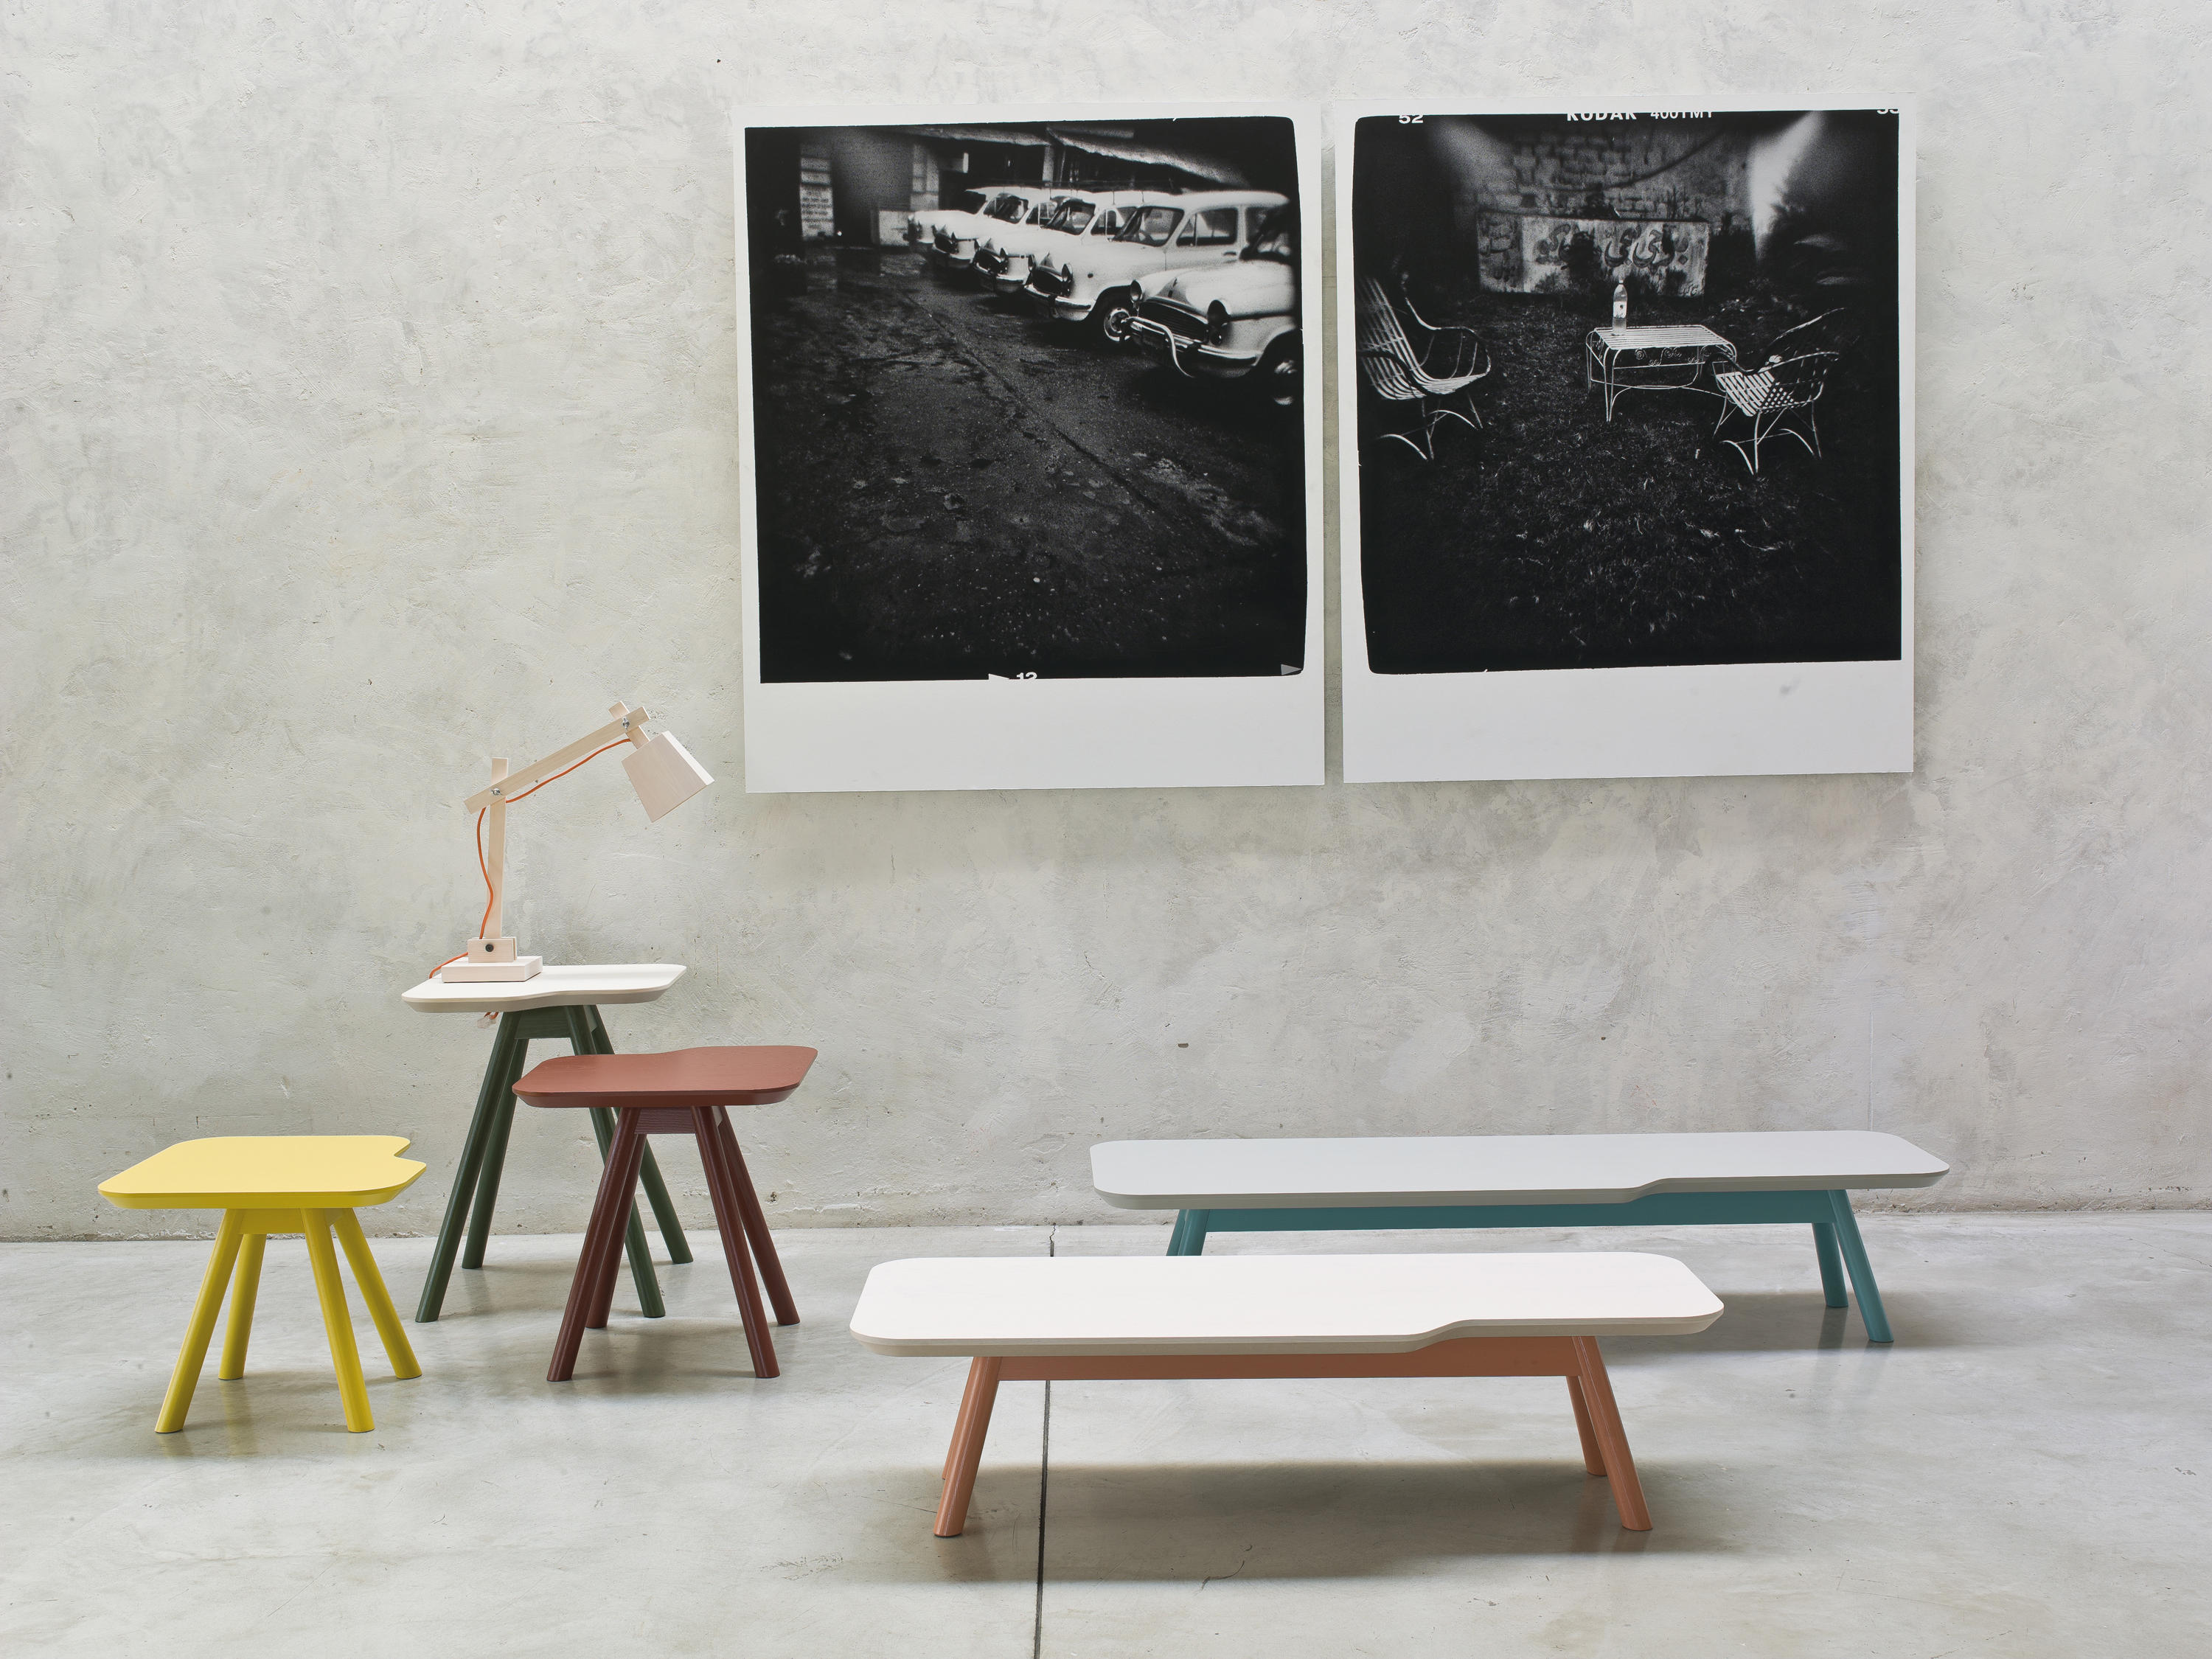 AKY Living Room Table Collection by Trabà